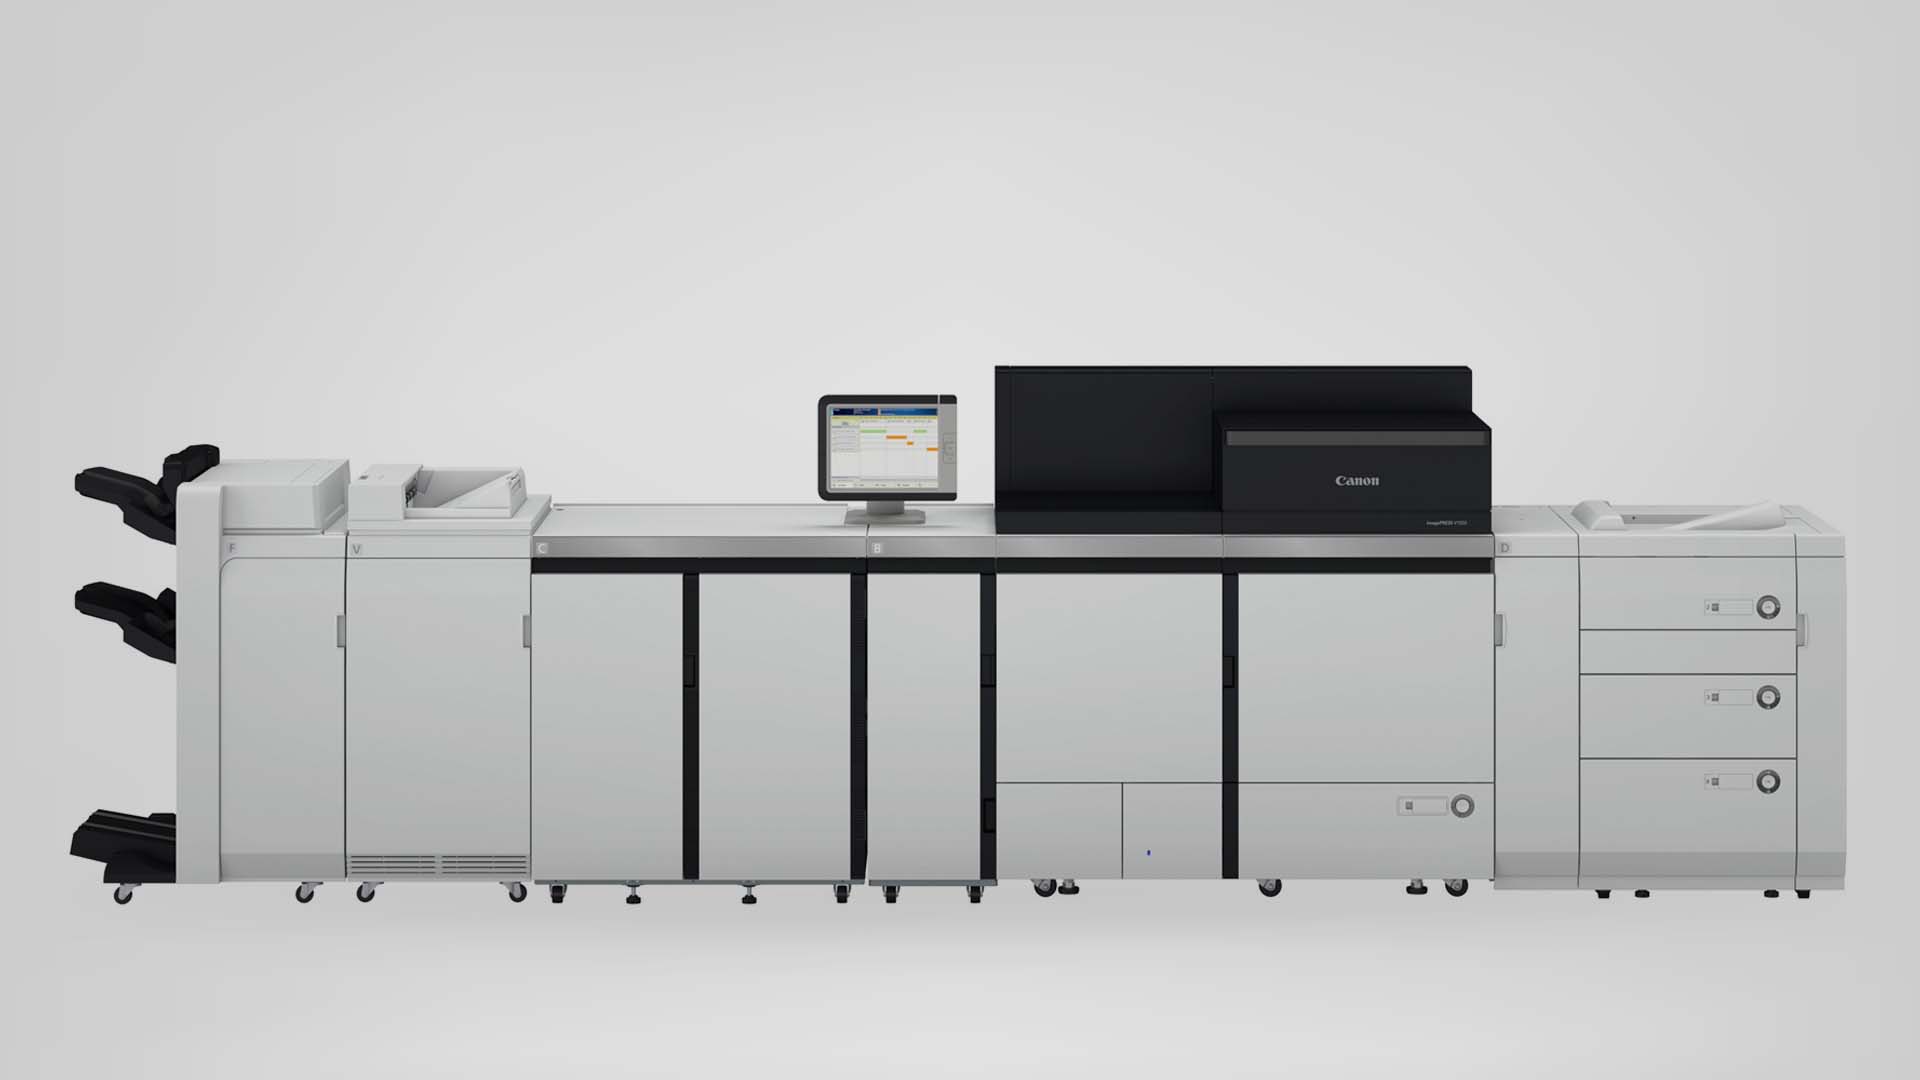 Canon extends its imagePRESS V series with the V1350 and V900